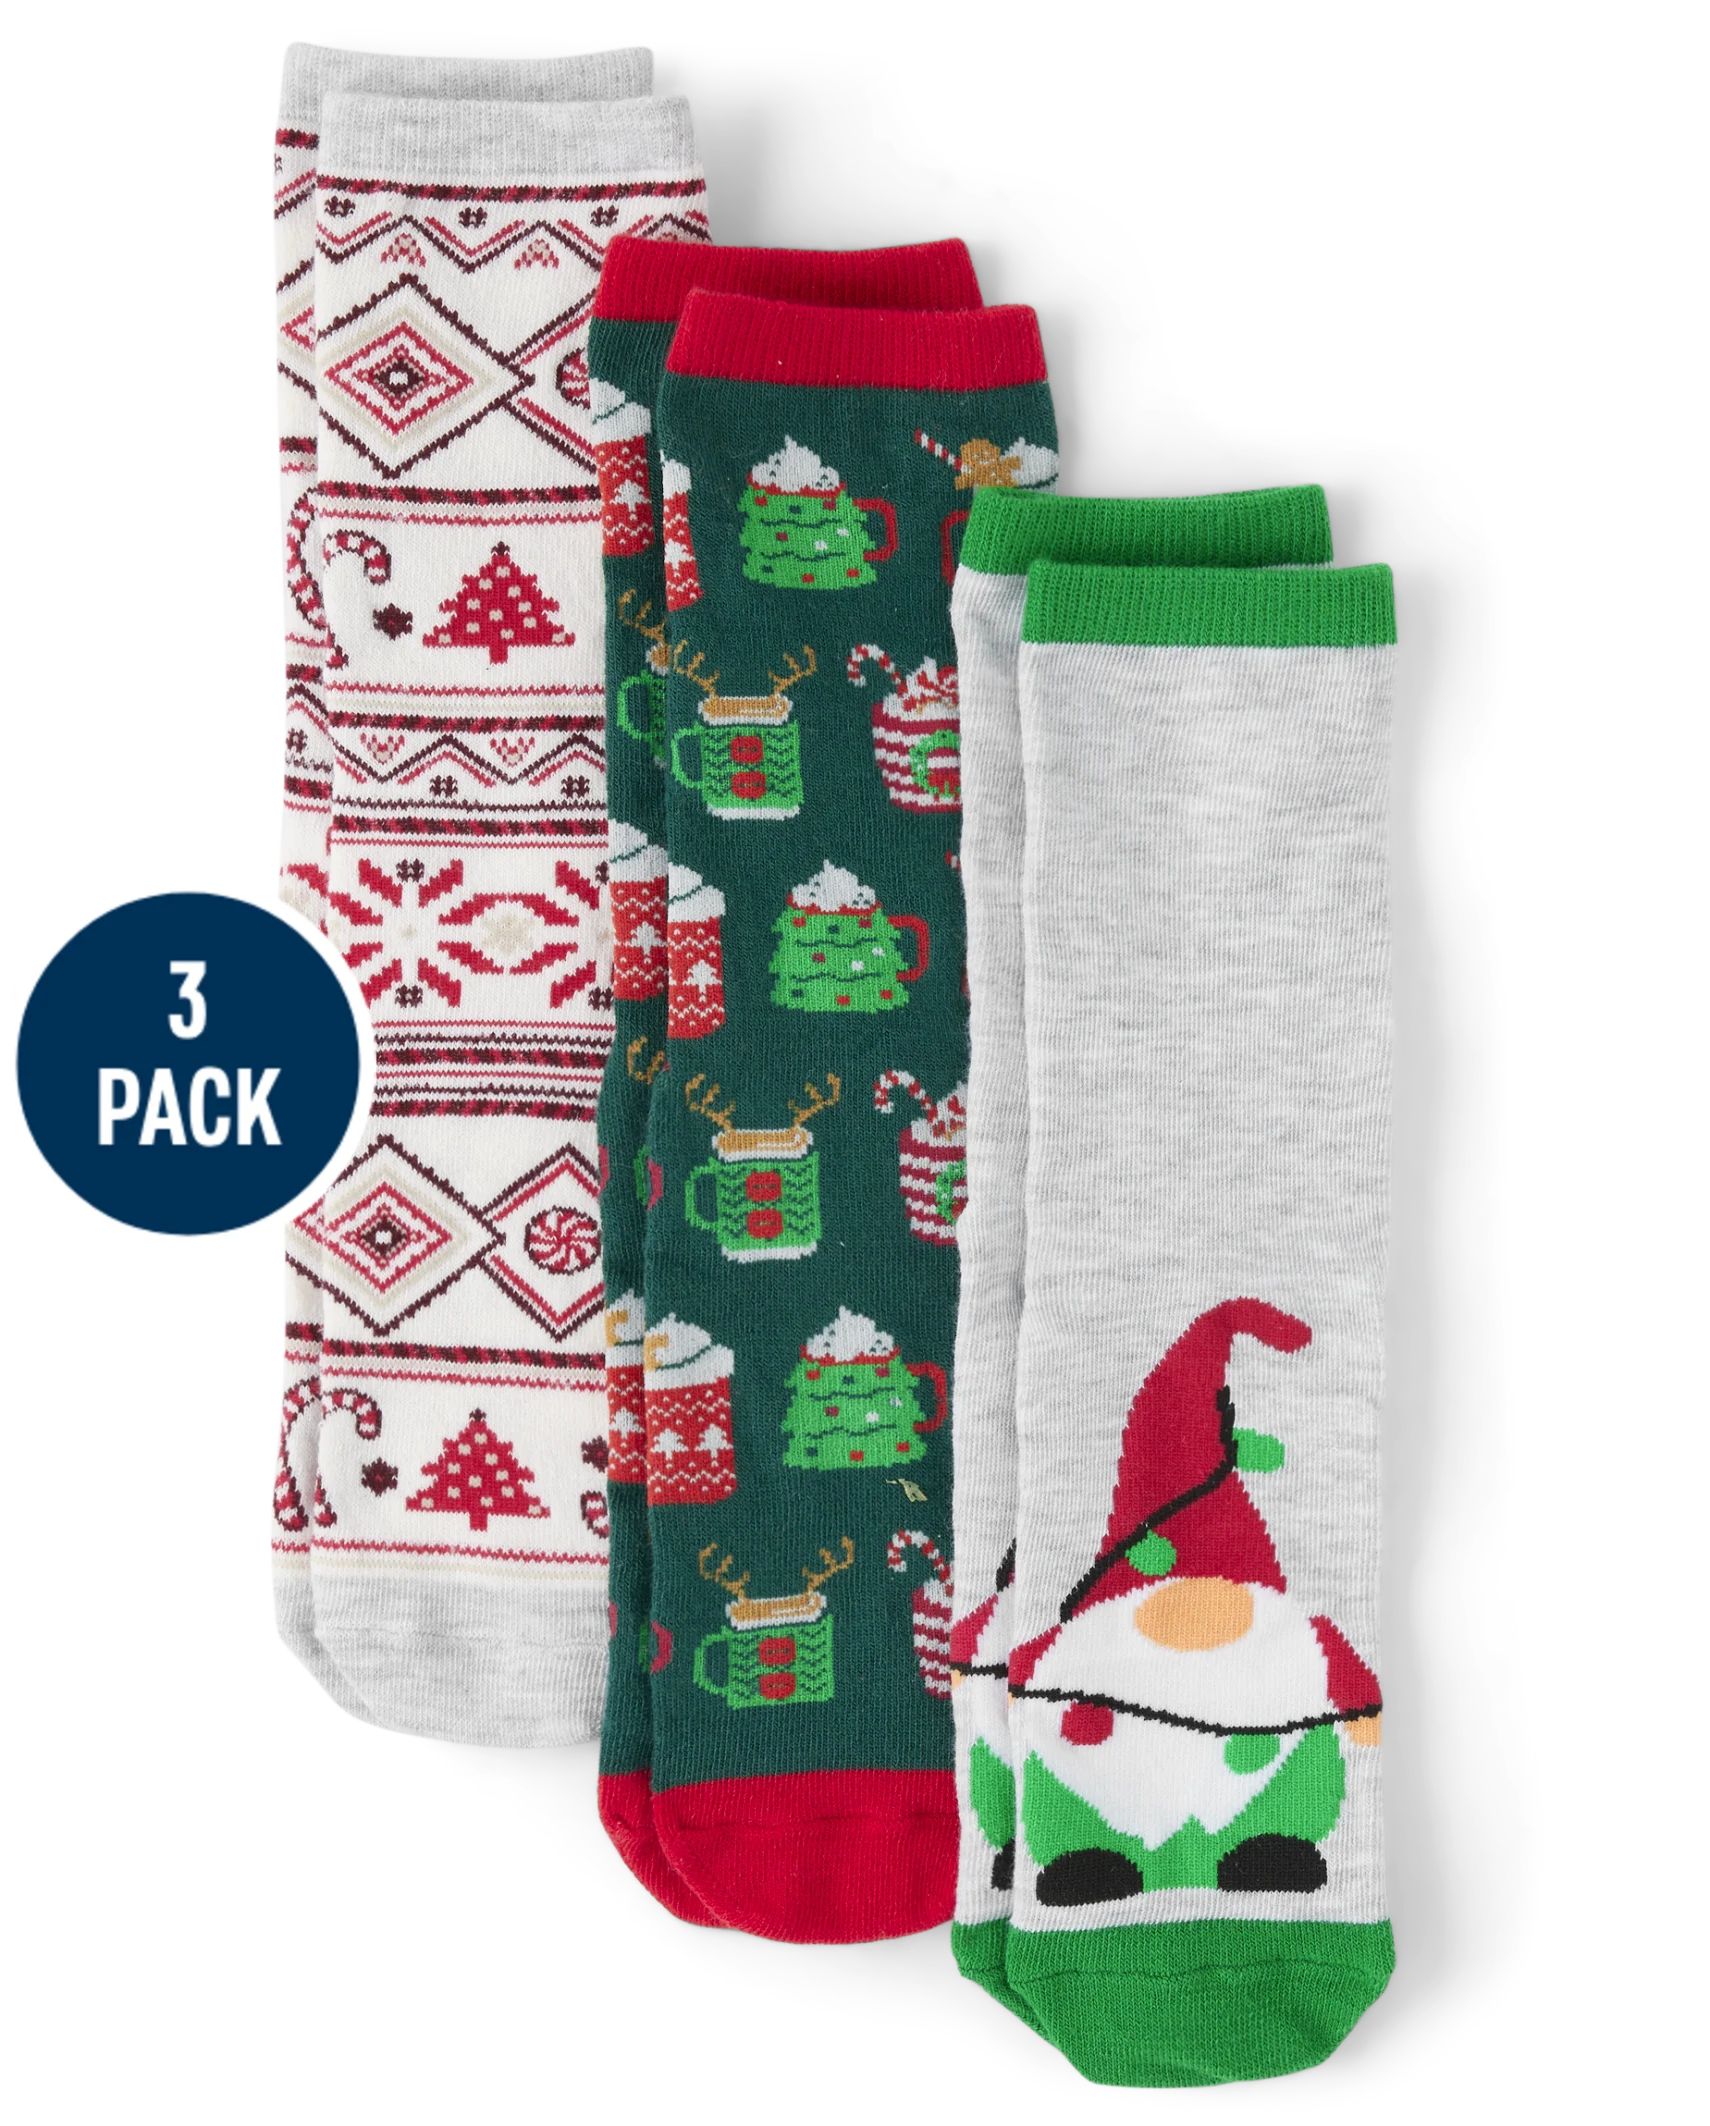 Unisex Adult Matching Family Christmas Gnome Crew Socks 3-Pack | The Children's Place  - MULTI CL... | The Children's Place